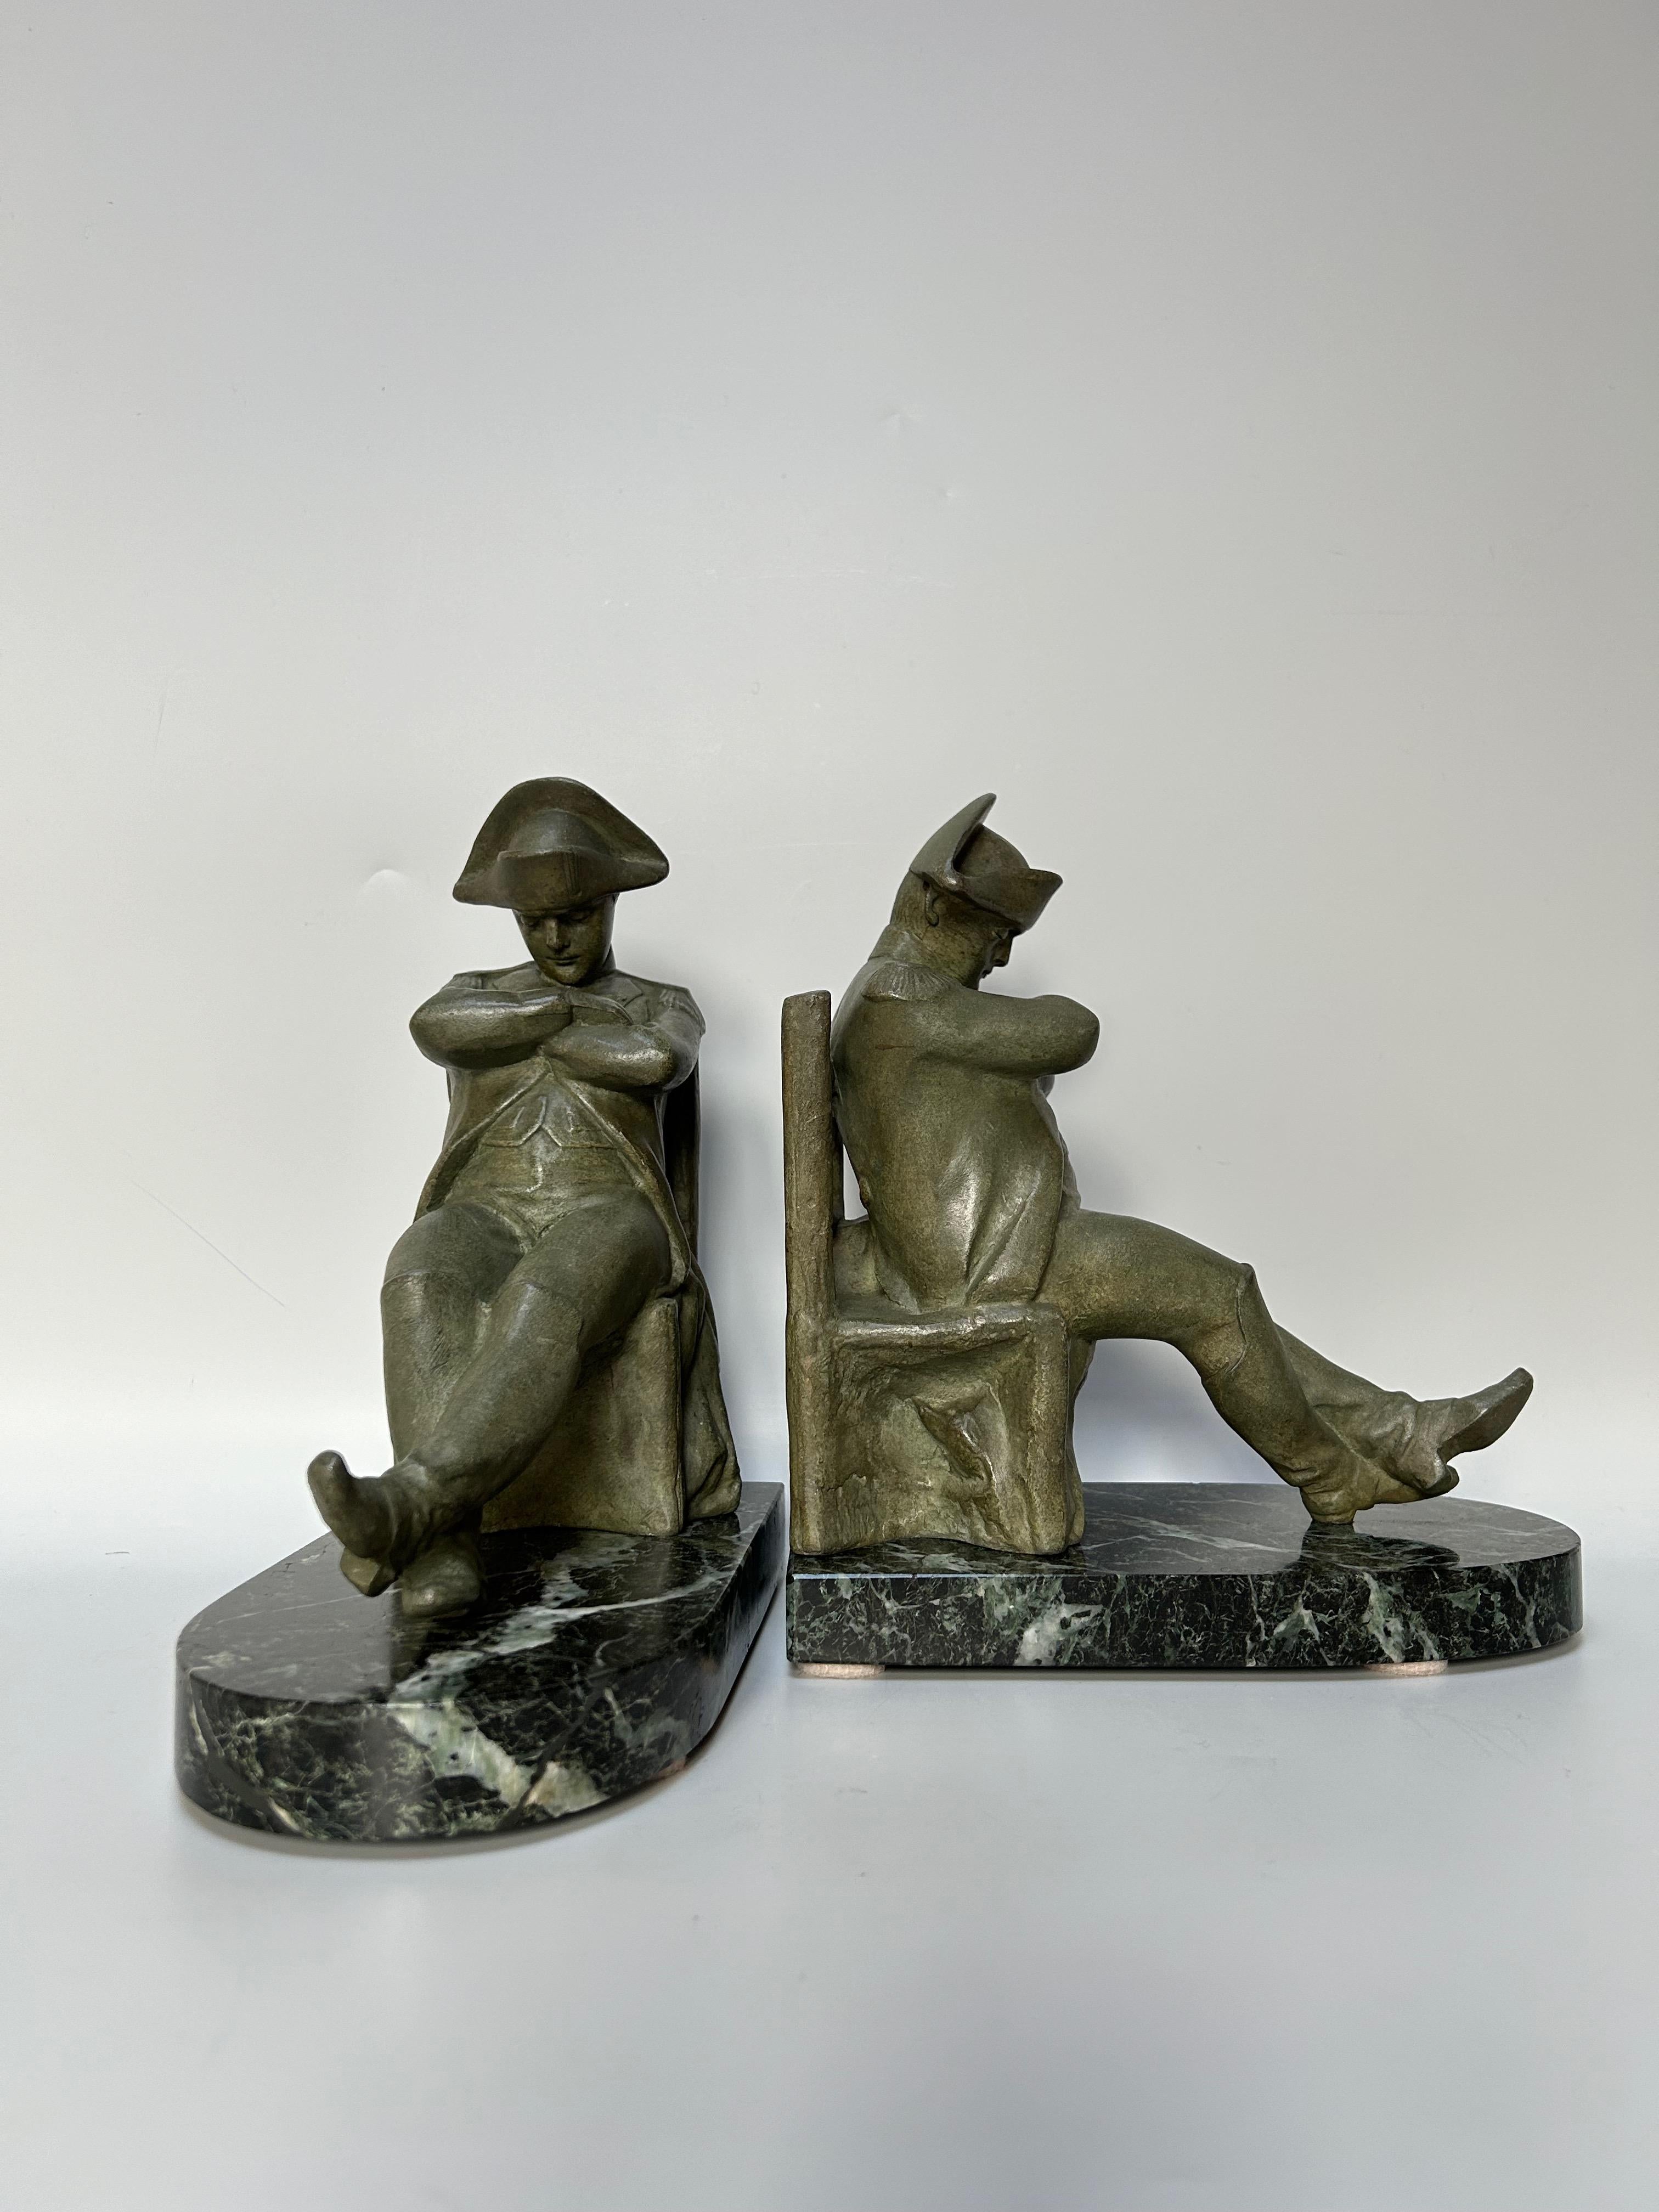 Pair of art deco bookends circa 1930.
Green patinated regula representing Napoleon on a chair.
Sea green marble base, signed on the terrace L. Carvin and founder's stamp on the back of the sculpture.
In perfect condition.

Height: 25cm
Width: